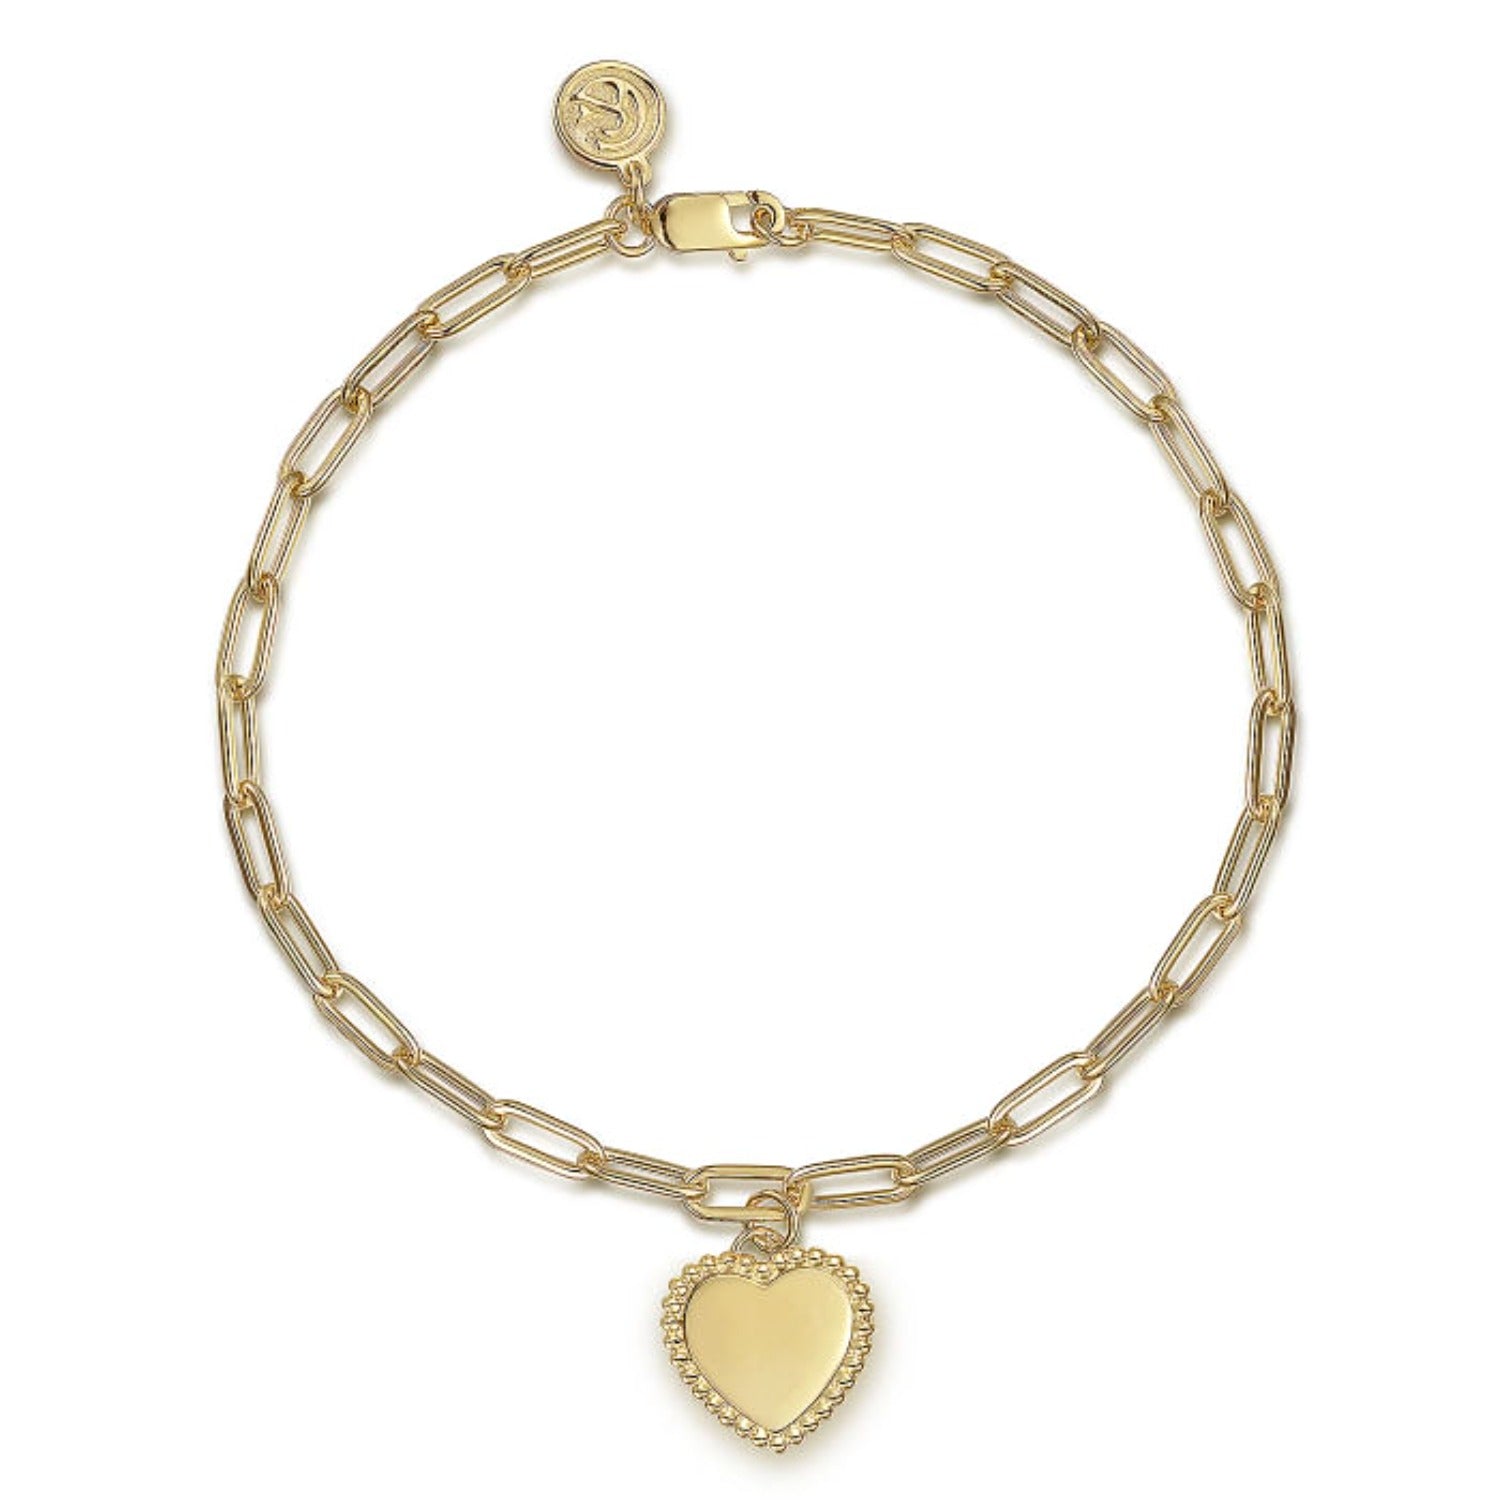 Valentines Day Jewelry Gifts For Her - Ben Garelick